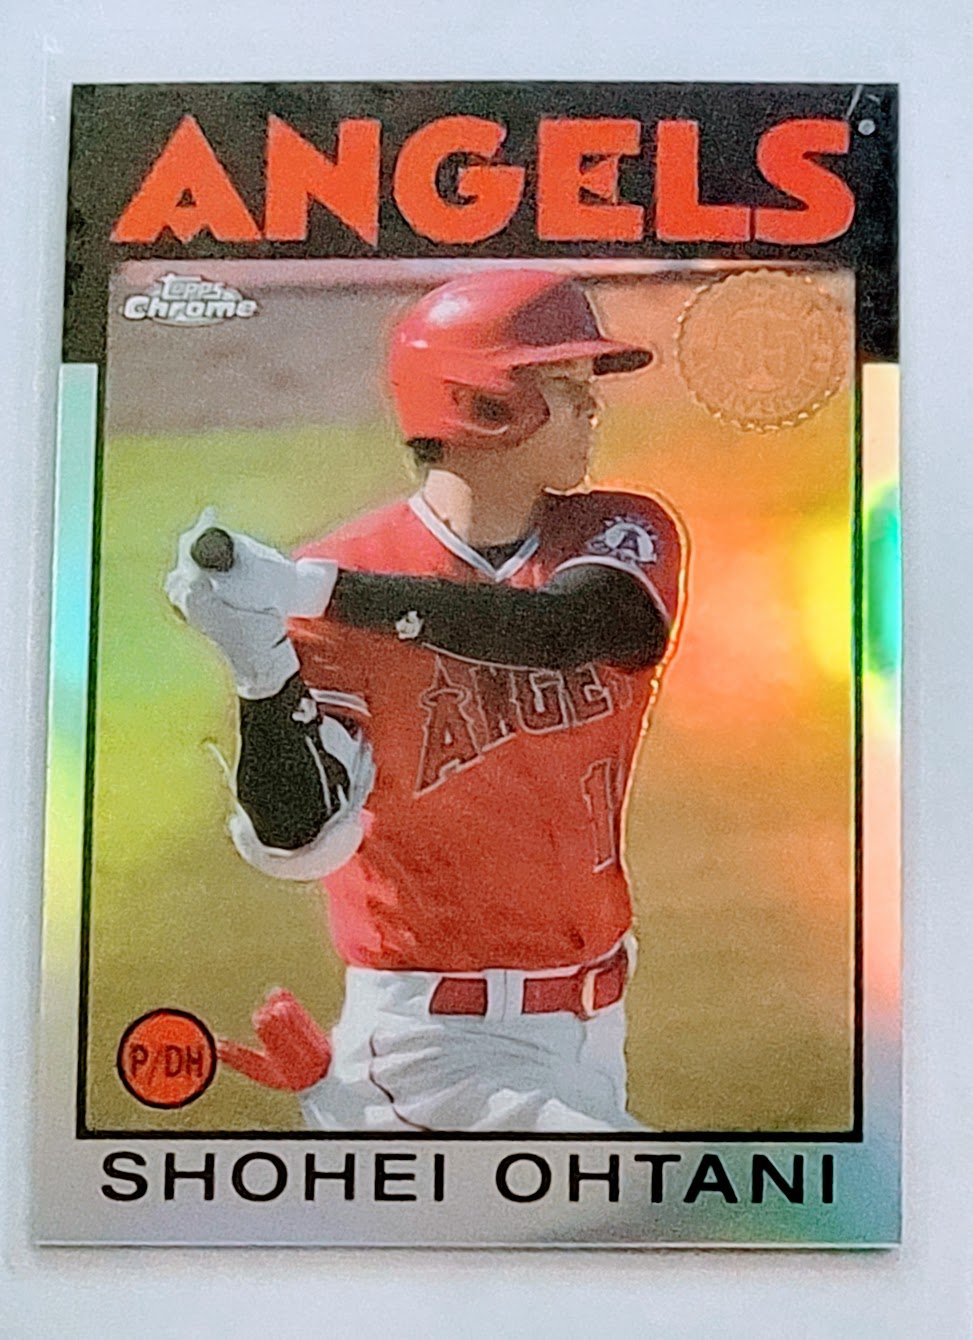 2021 Topps Chrome Update Shohei Ohtani 1985 Anniversary Refractor Baseball Card TPTV simple Xclusive Collectibles   